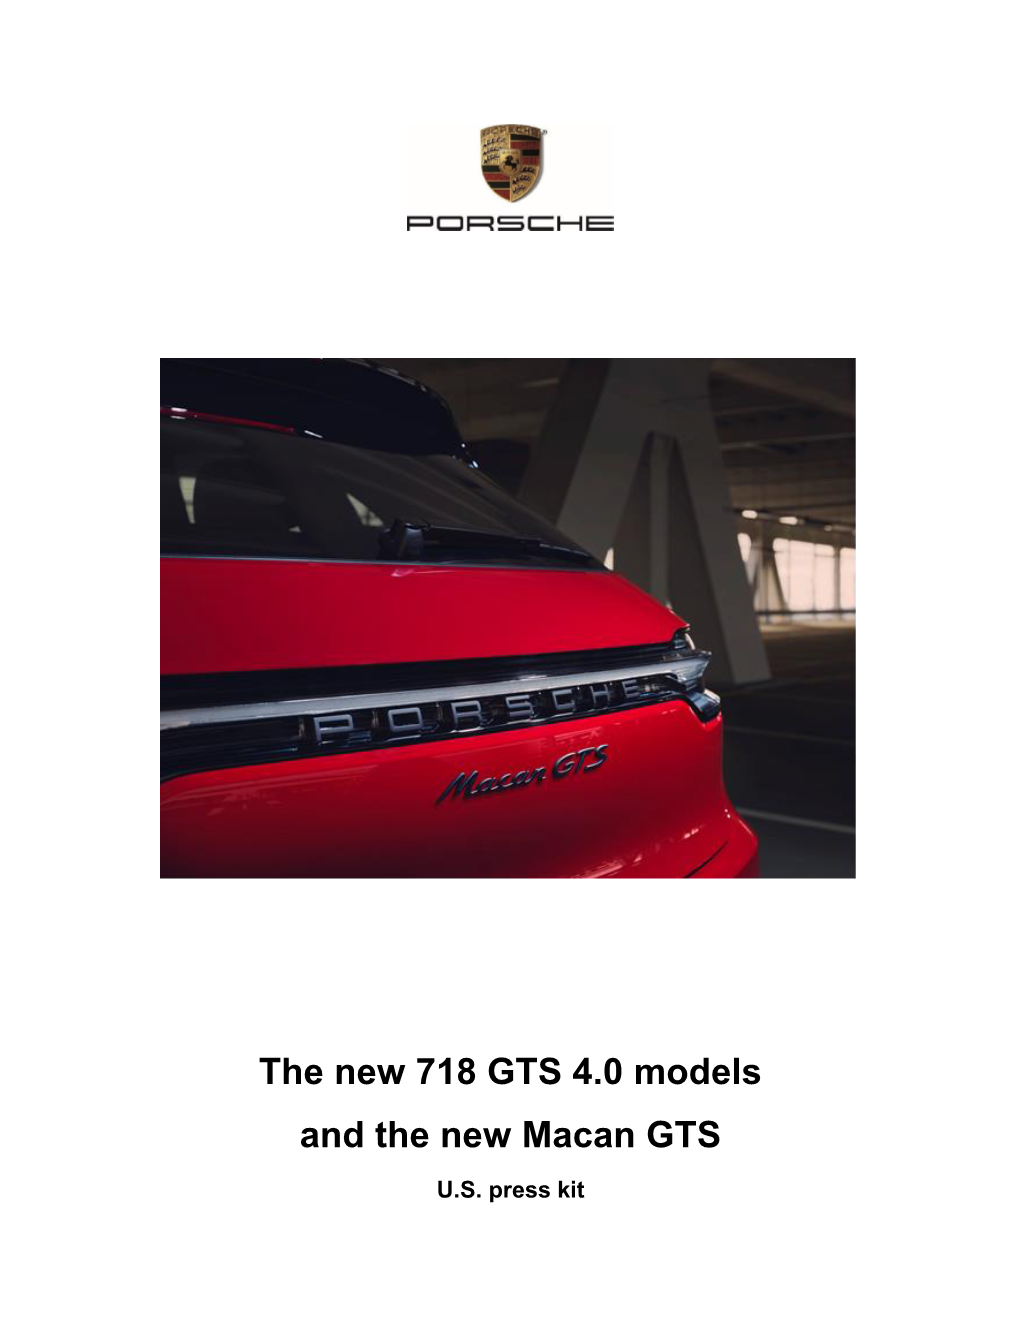 The New 718 GTS 4.0 Models and the New Macan GTS